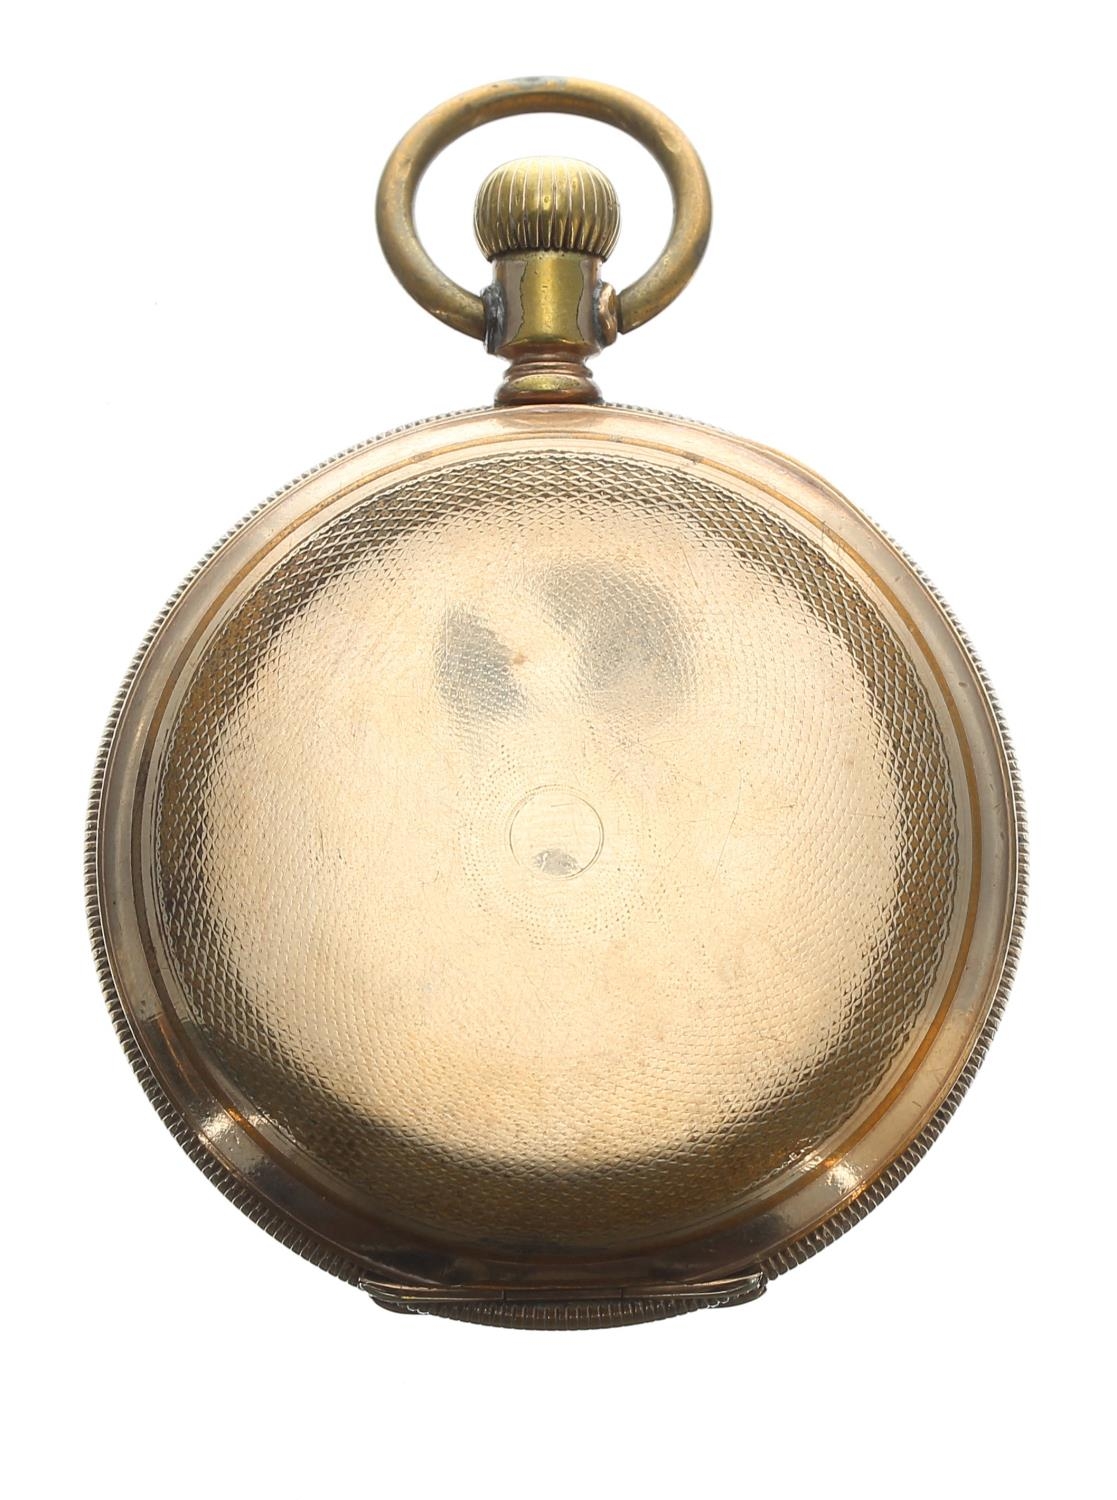 Elgin gold plated lever hunter pocket watch, circa 1909, signed gilt frosted 7 jewel movement with - Image 3 of 4